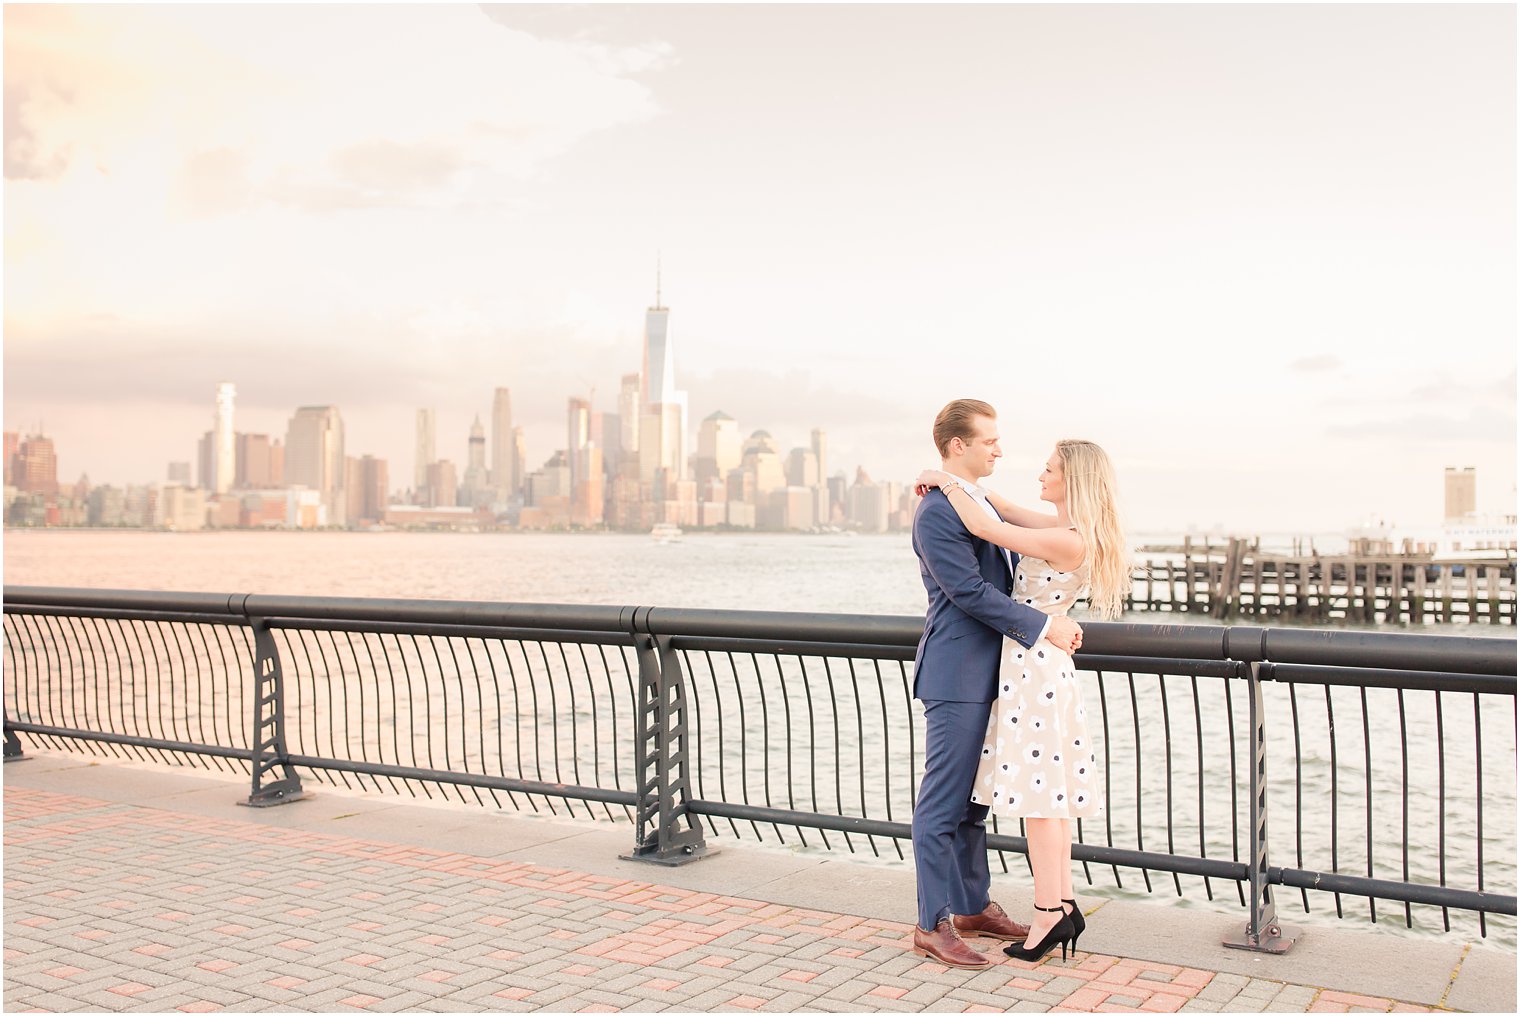 Romantic engagement photo with NYC skyline